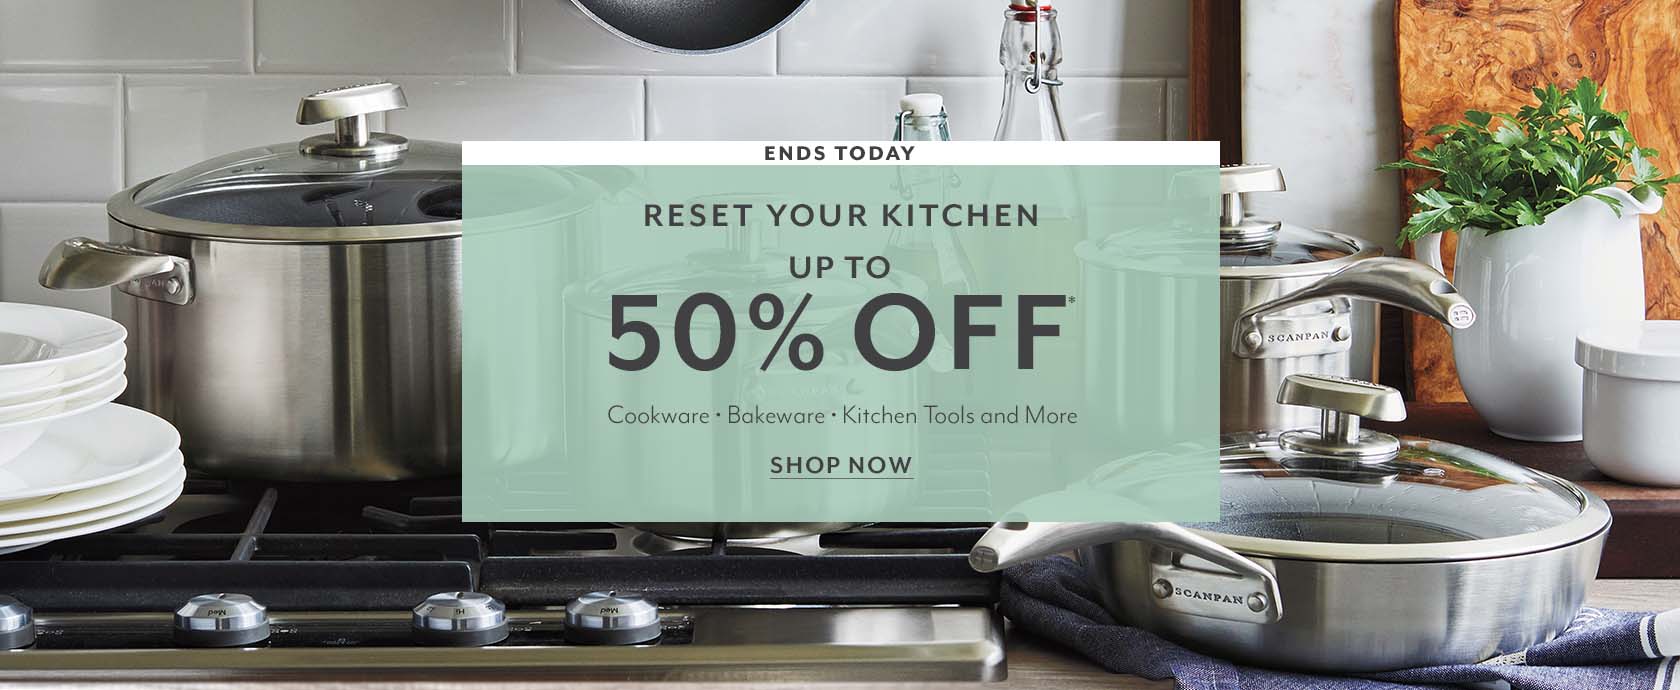 Ends today Reset your kitchen up to 50% off cookware, bakeware, kitchen tools and more. Shop Now. Nonstick cookware on cooktop.